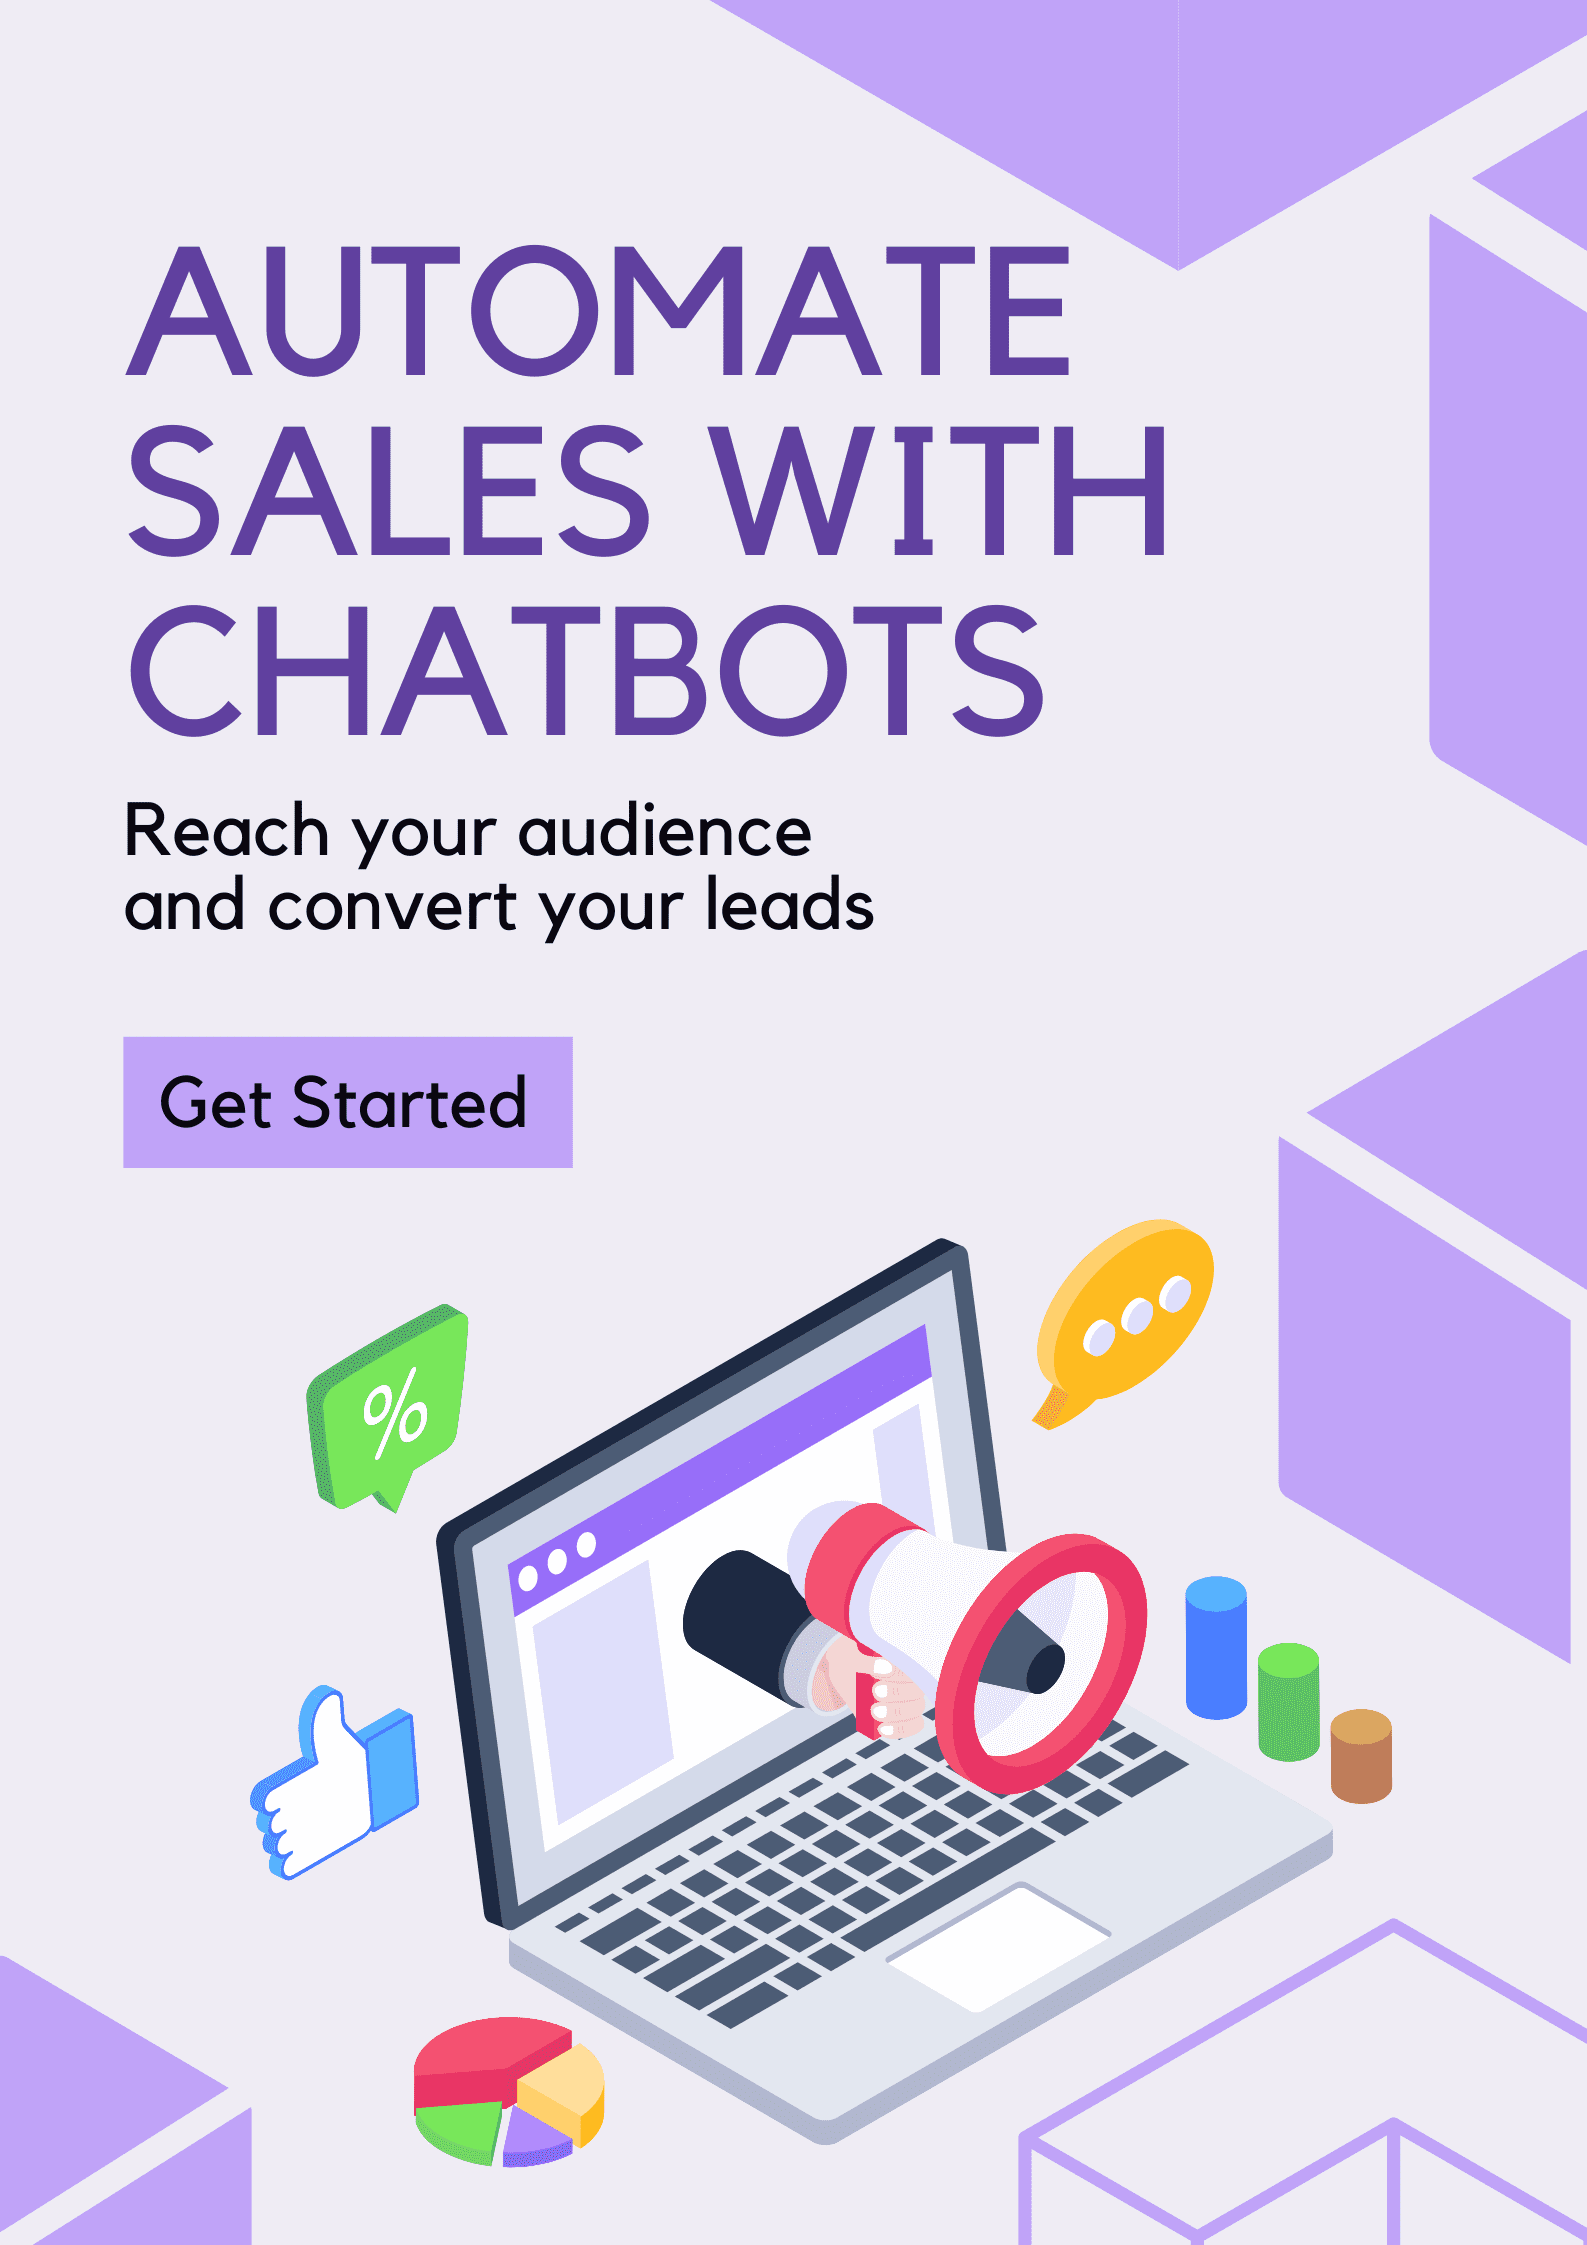 Automate sales with chatbots